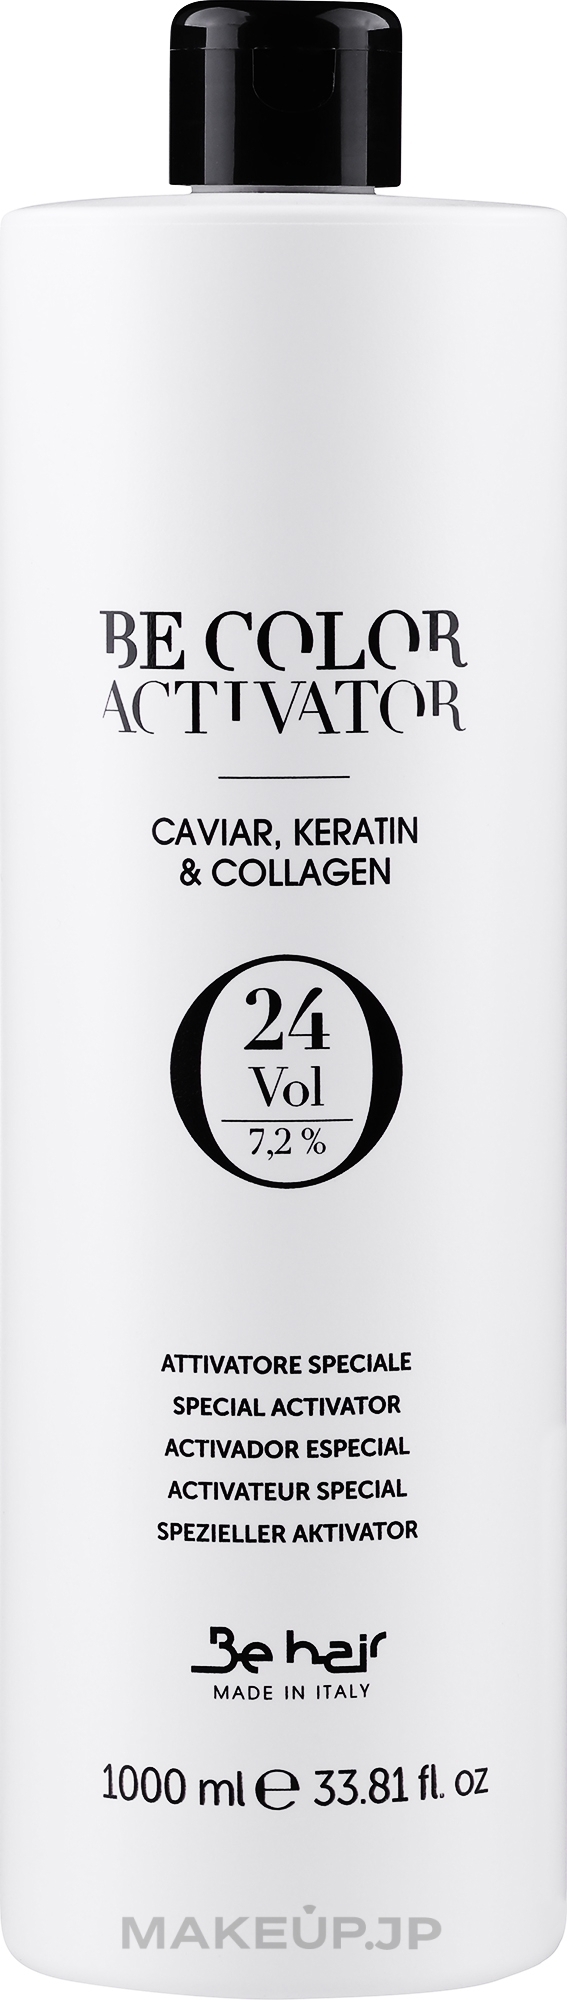 Oxidizer 7,2% - Be Hair Be Color Activator with Caviar Keratin and Collagen — photo 1000 ml